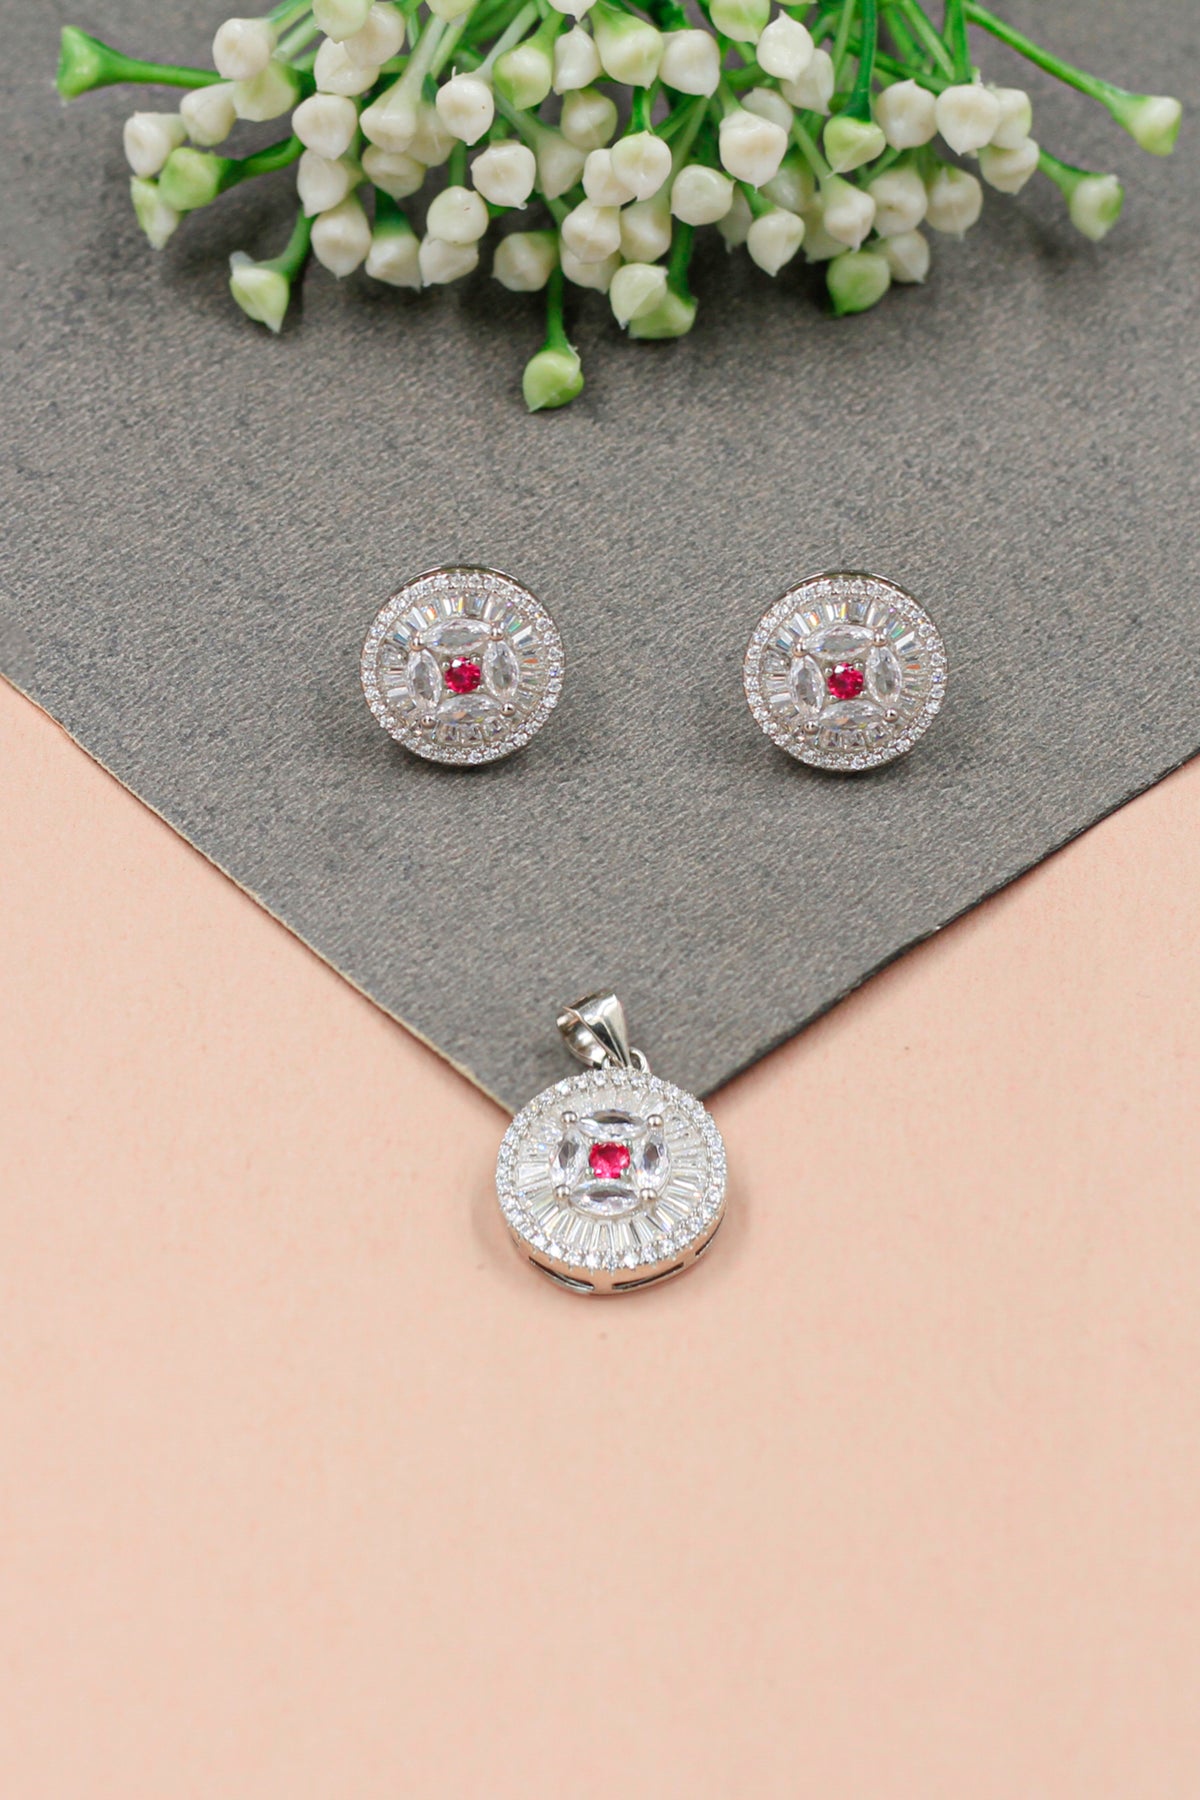 Cz Earring and Pendant Combination